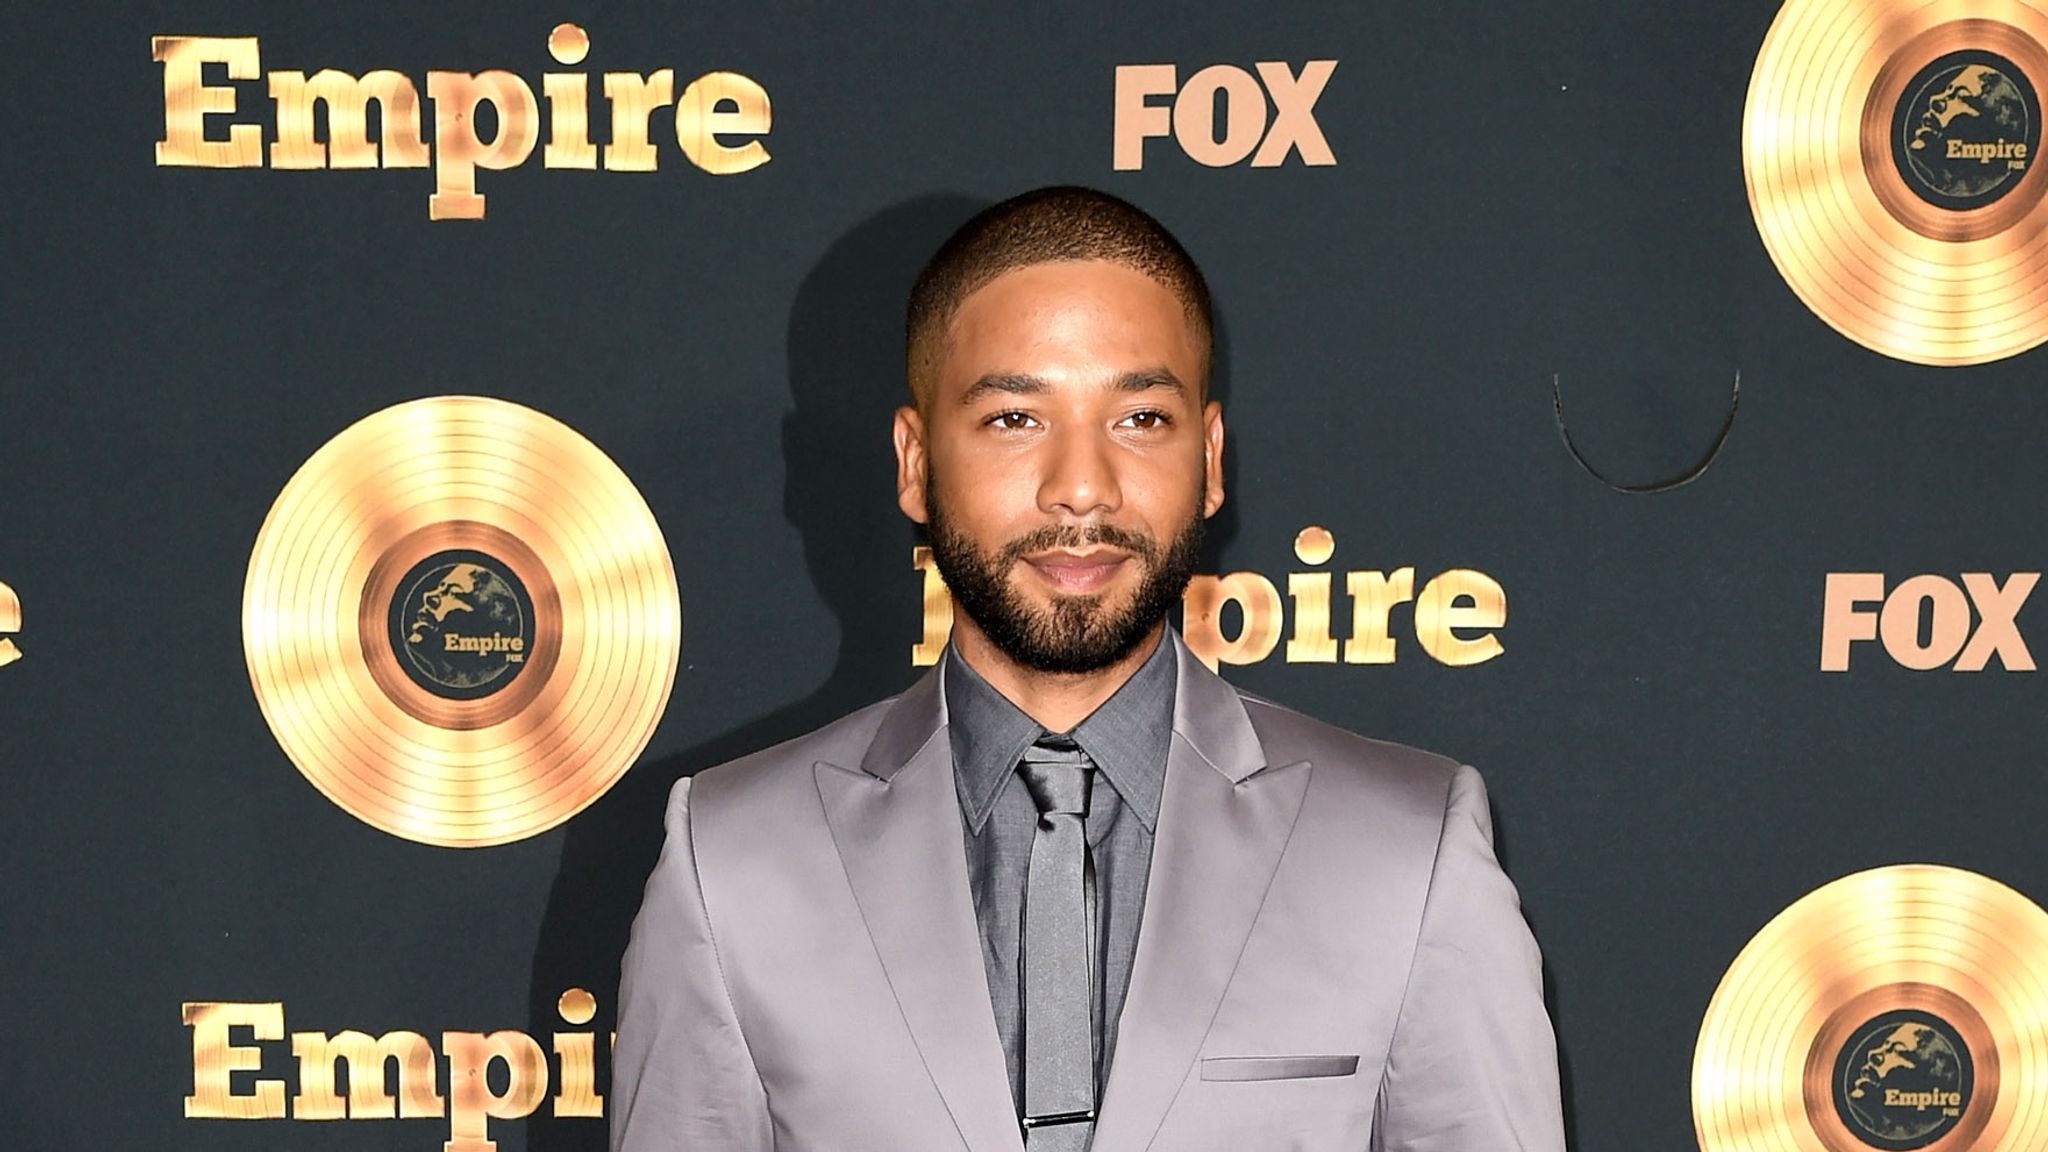 jussie smollett no plans for star to return to empire after racist attack ents arts news sky news jussie smollett no plans for star to